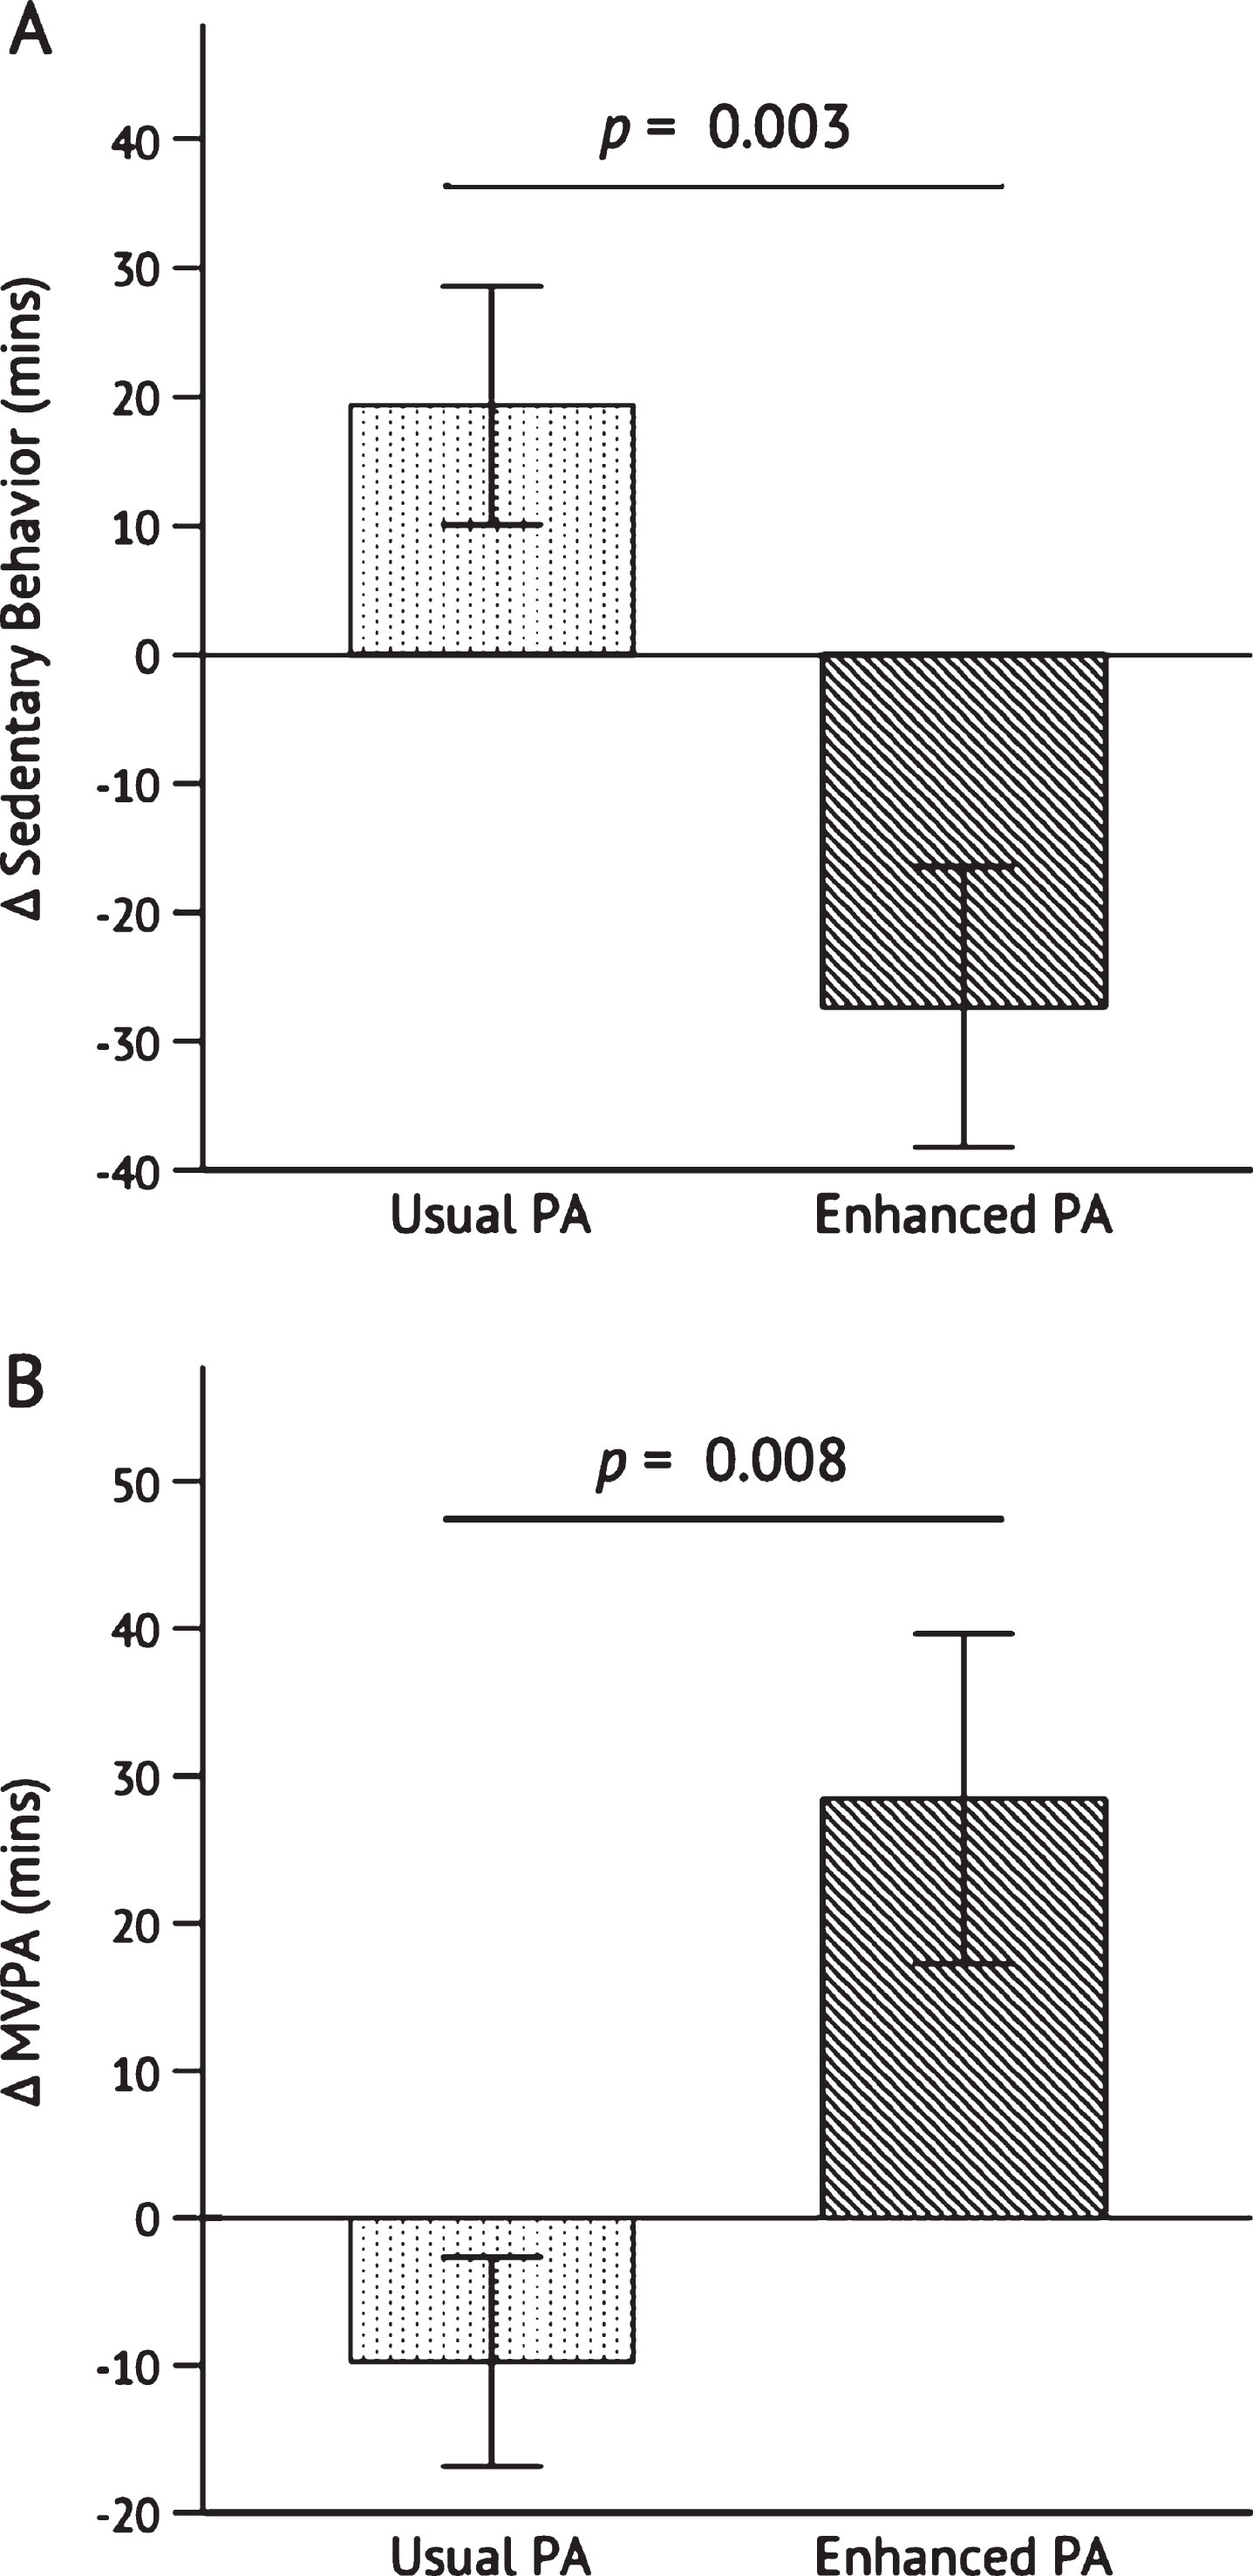 Change in sedentary behavior (A) and moderate-to-vigorous physical activity (B) after the 26-week intervention. Independent samples t-test was conducted to determine the statistical significance of the difference between Usual PA (n = 12) and Enhanced PA (n = 11). Abbreviations: moderate-to-vigorous physical activity (MVPA); physical activity (PA).